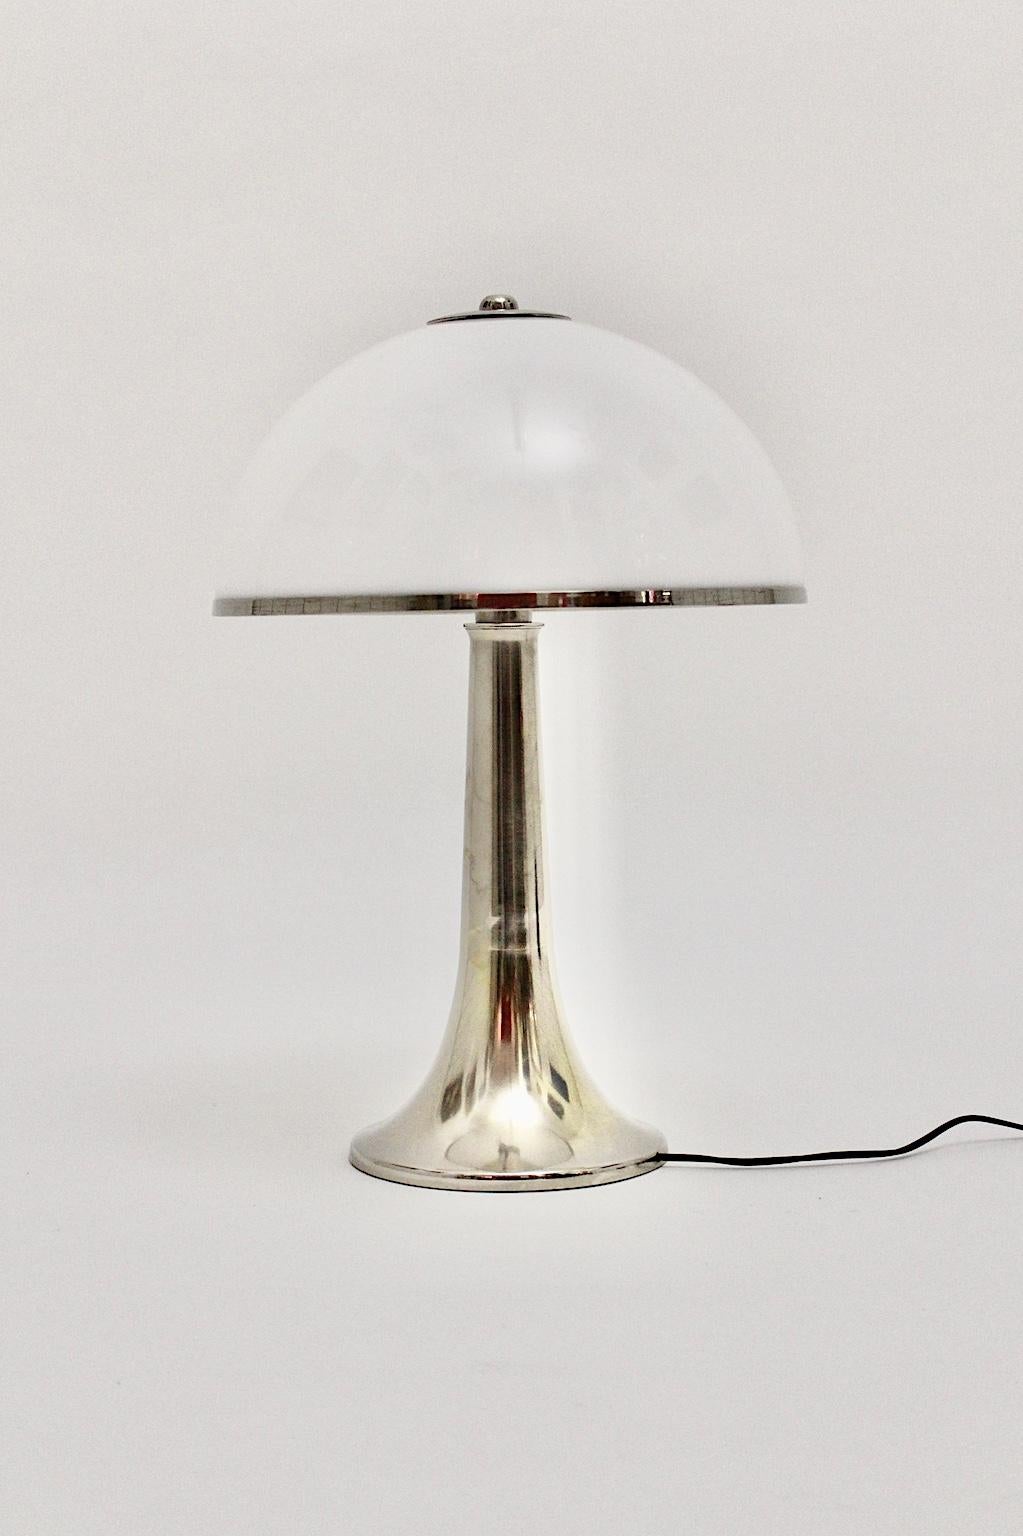  Gabriella Crespi vintage brass nickel-plated white plexiglass table lamp Fungo,  1970, Italy.
Gabriella Crespi (17.2.1922-14.2 2017) was a famed female Italian artist and designer, whose work spanned from furniture design, jewelry and